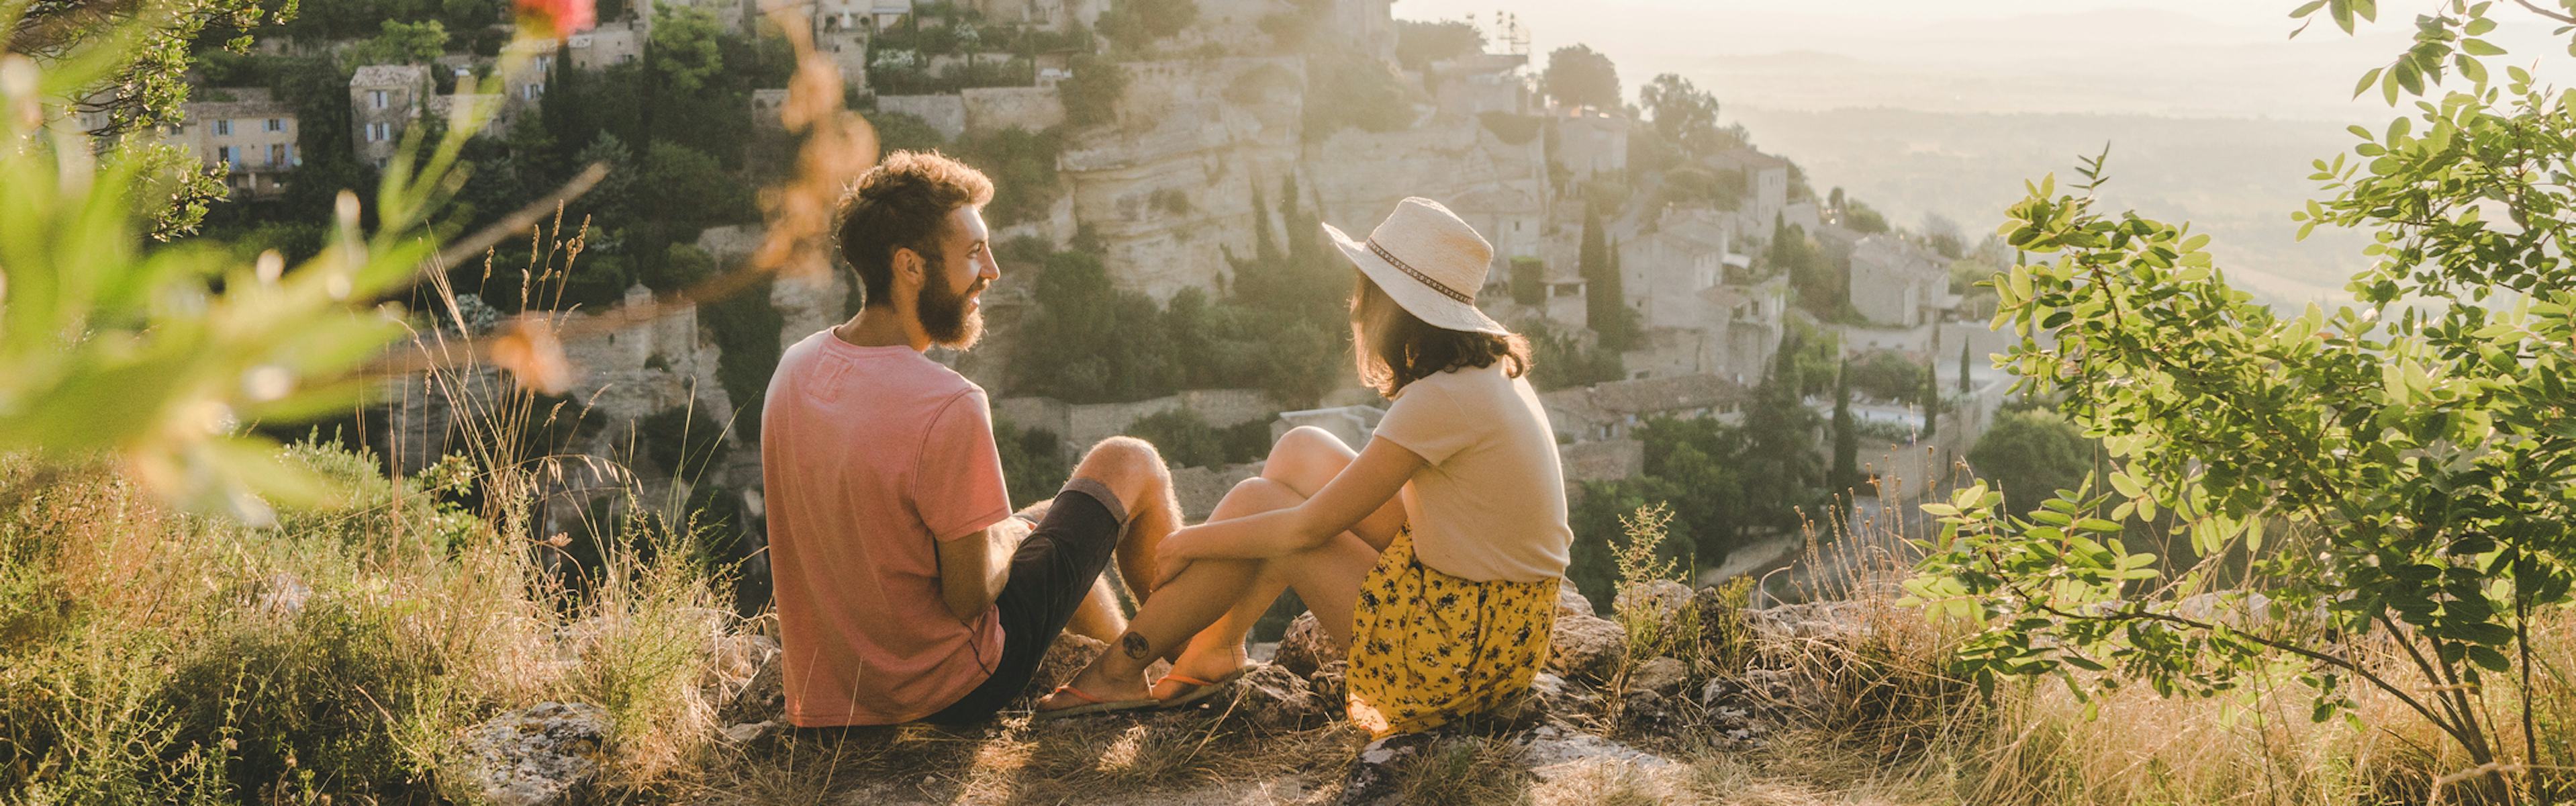 Woman and man looking at scenic view of Gordes village in Provence